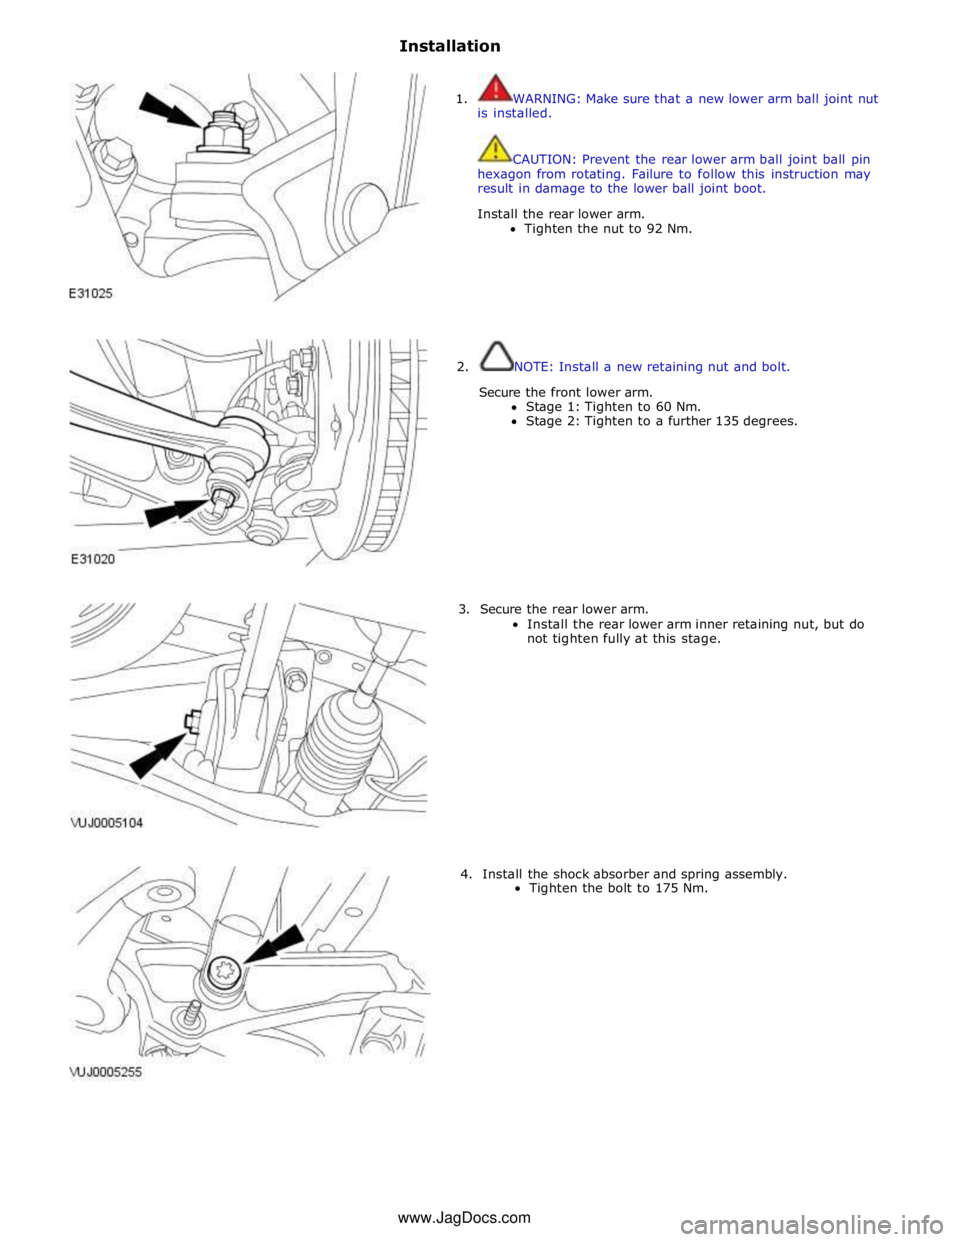 JAGUAR XFR 2010 1.G Workshop Manual Installation 
 
 
1.  WARNING: Make sure that a new lower arm ball joint nut 
is installed. 
 
CAUTION: Prevent the rear lower arm ball joint ball pin 
hexagon from rotating. Failure to follow this in